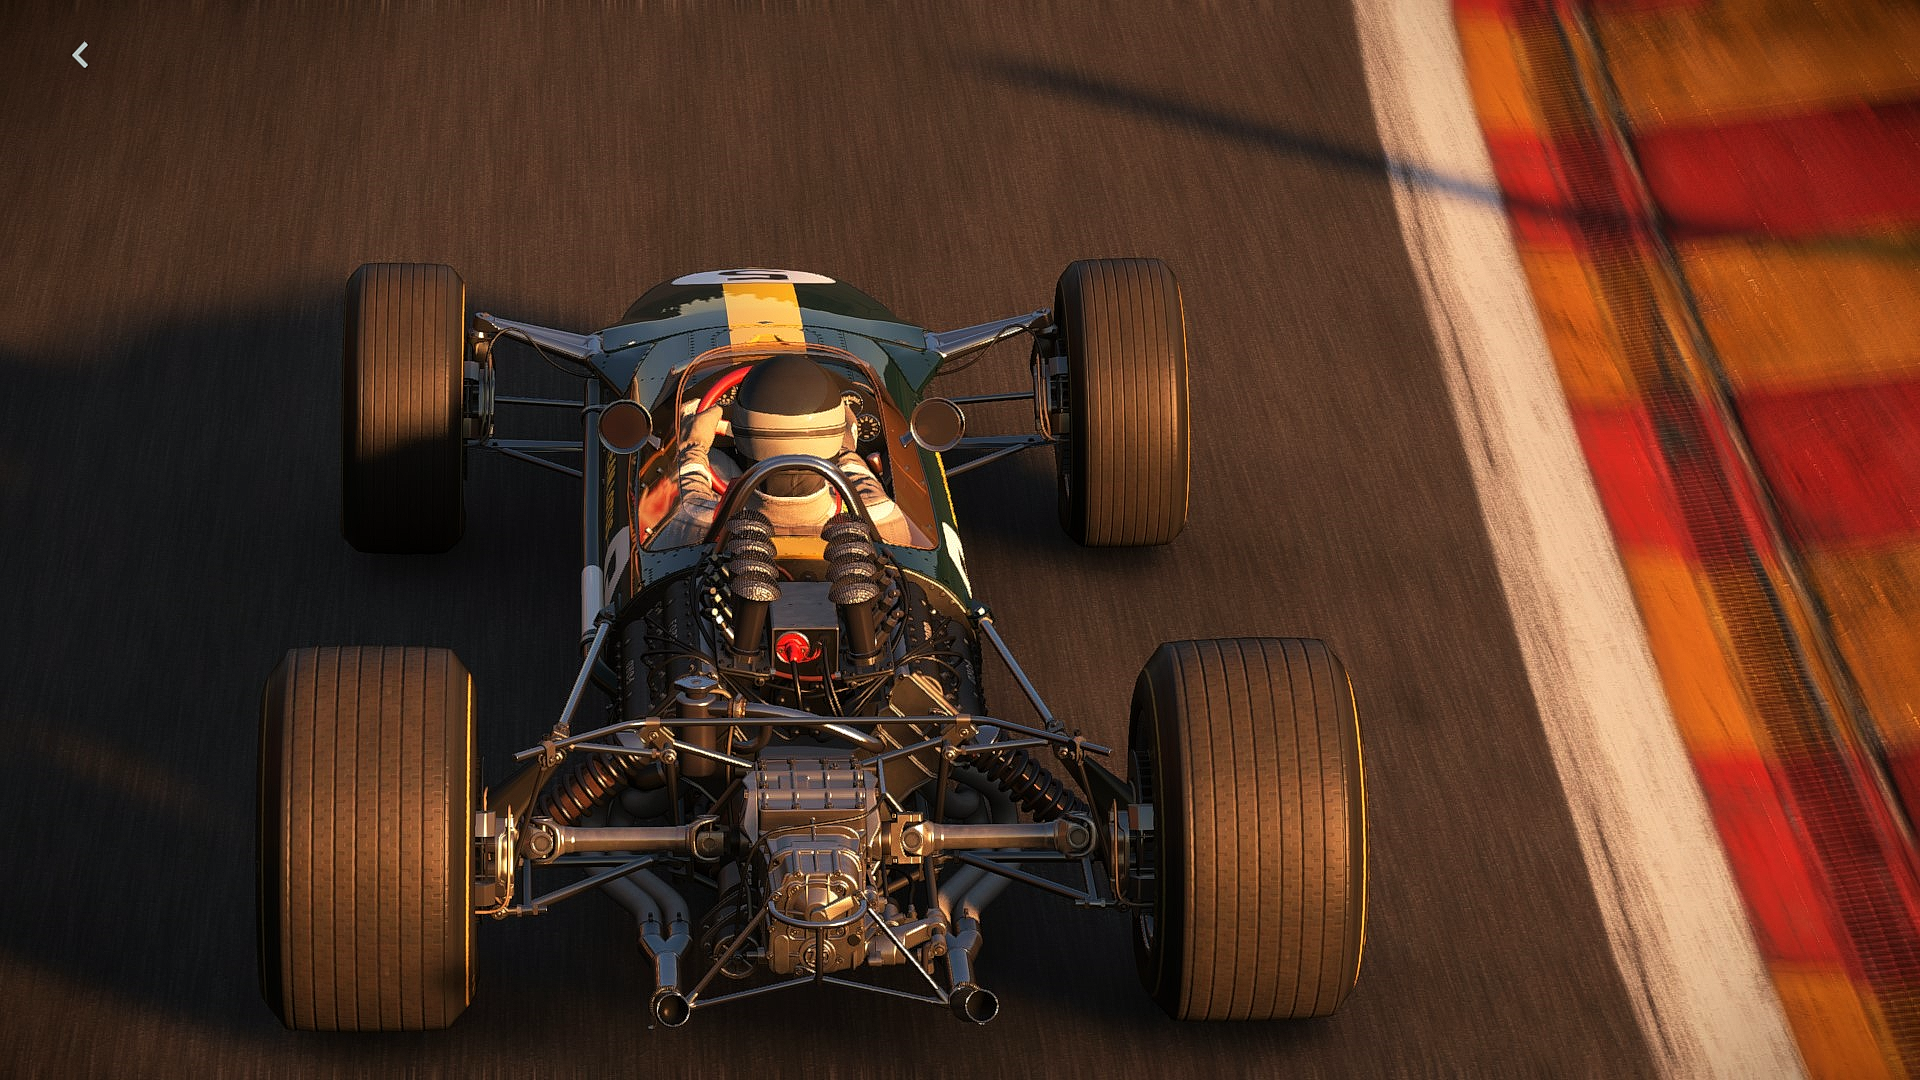 General 1920x1080 Spa-Francorchamps 1968 Lotus 49 Project cars video games PC gaming sport motorsport racing screen shot